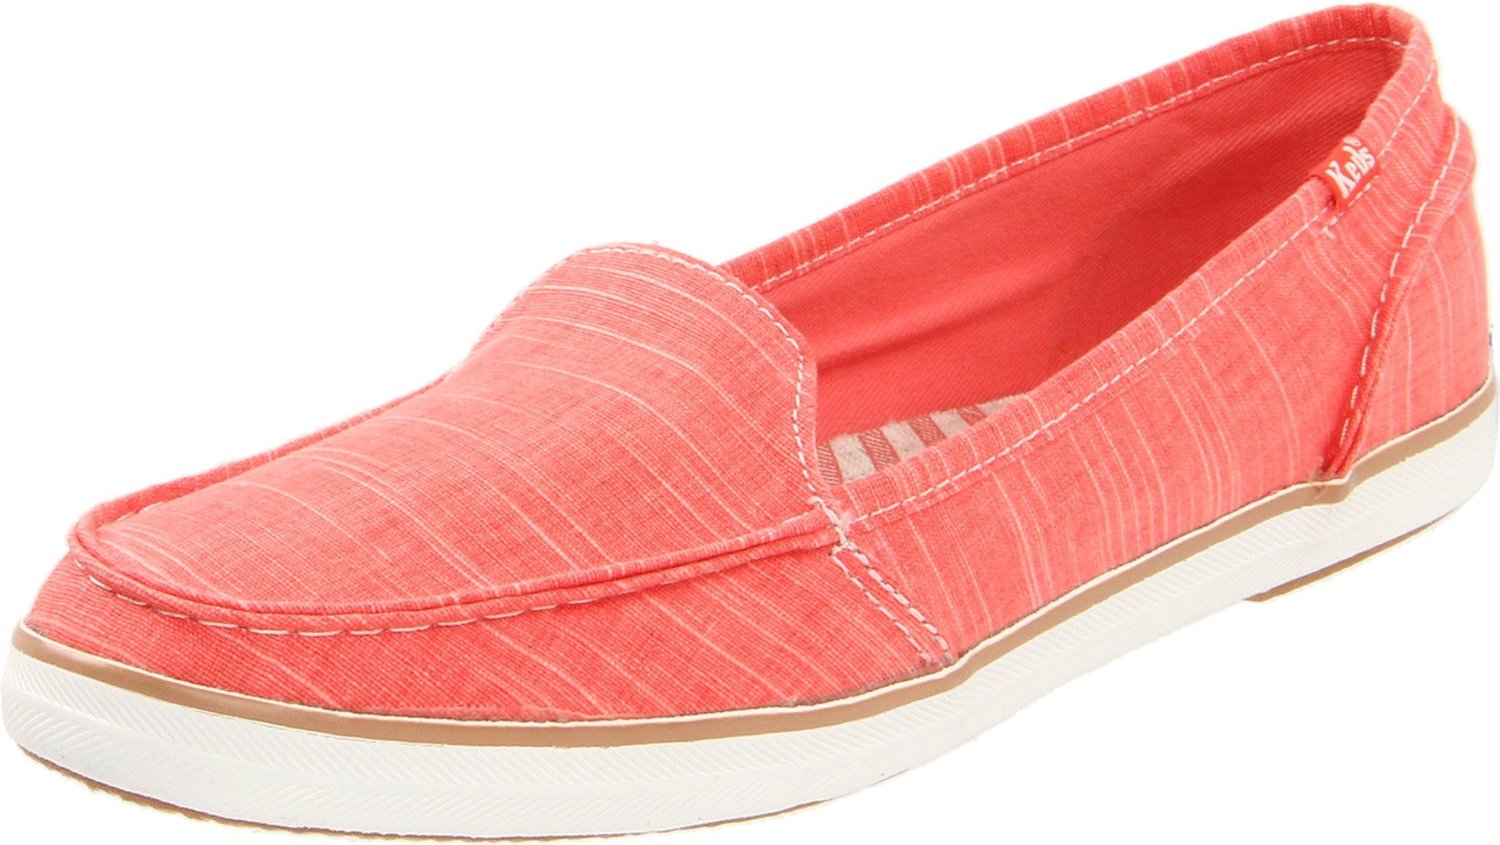 Keds Womens Surfer Canvas Boat Shoe in Pink (coral) | Lyst